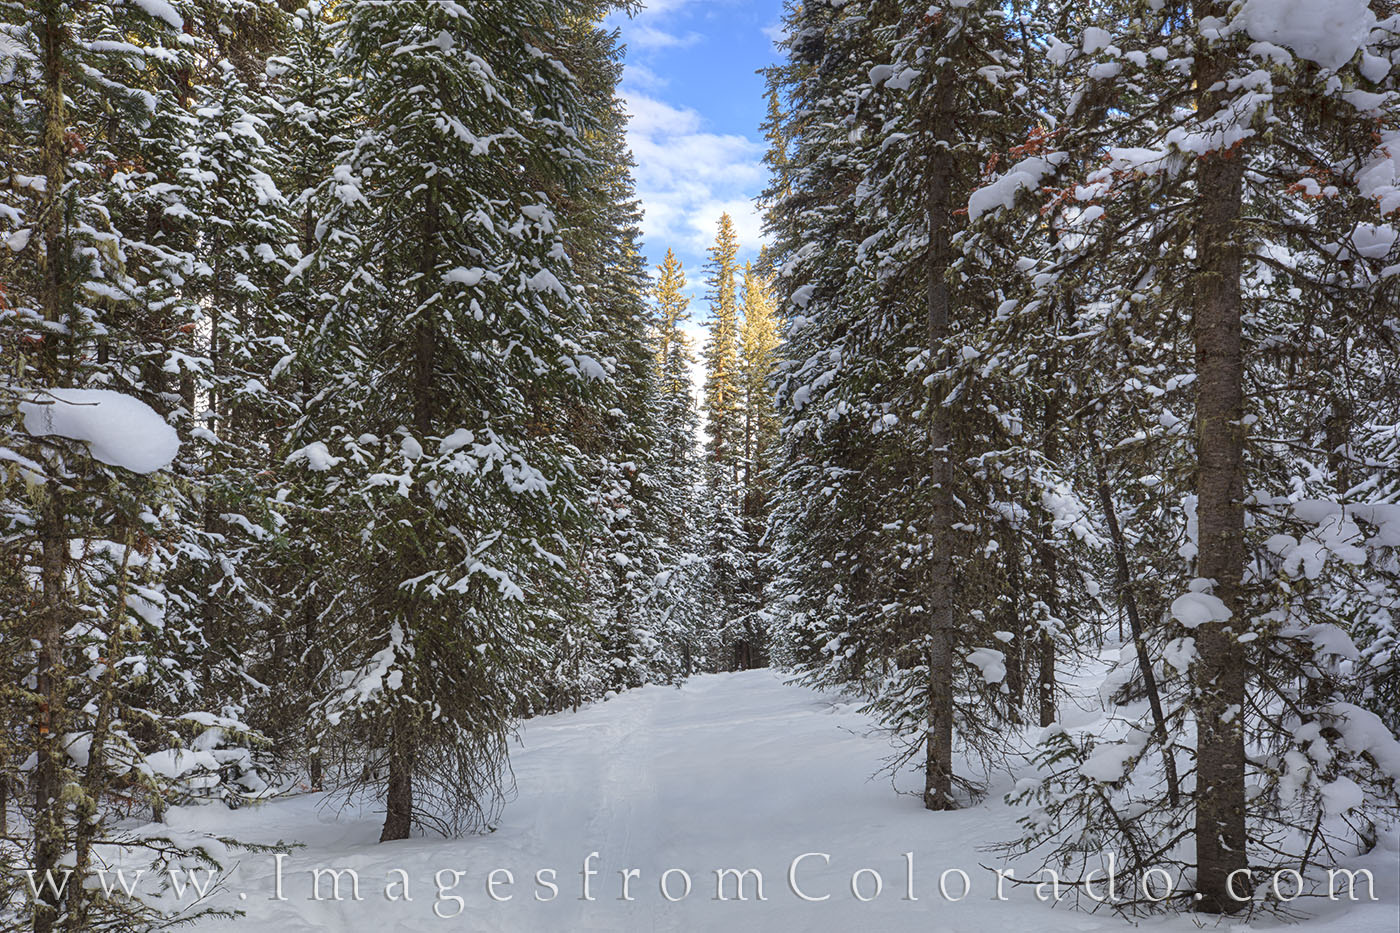 Lost in the Byers Peak Wilderness, my journey took me on pristine trails of fresh snow. The trees, covered in white, took on...